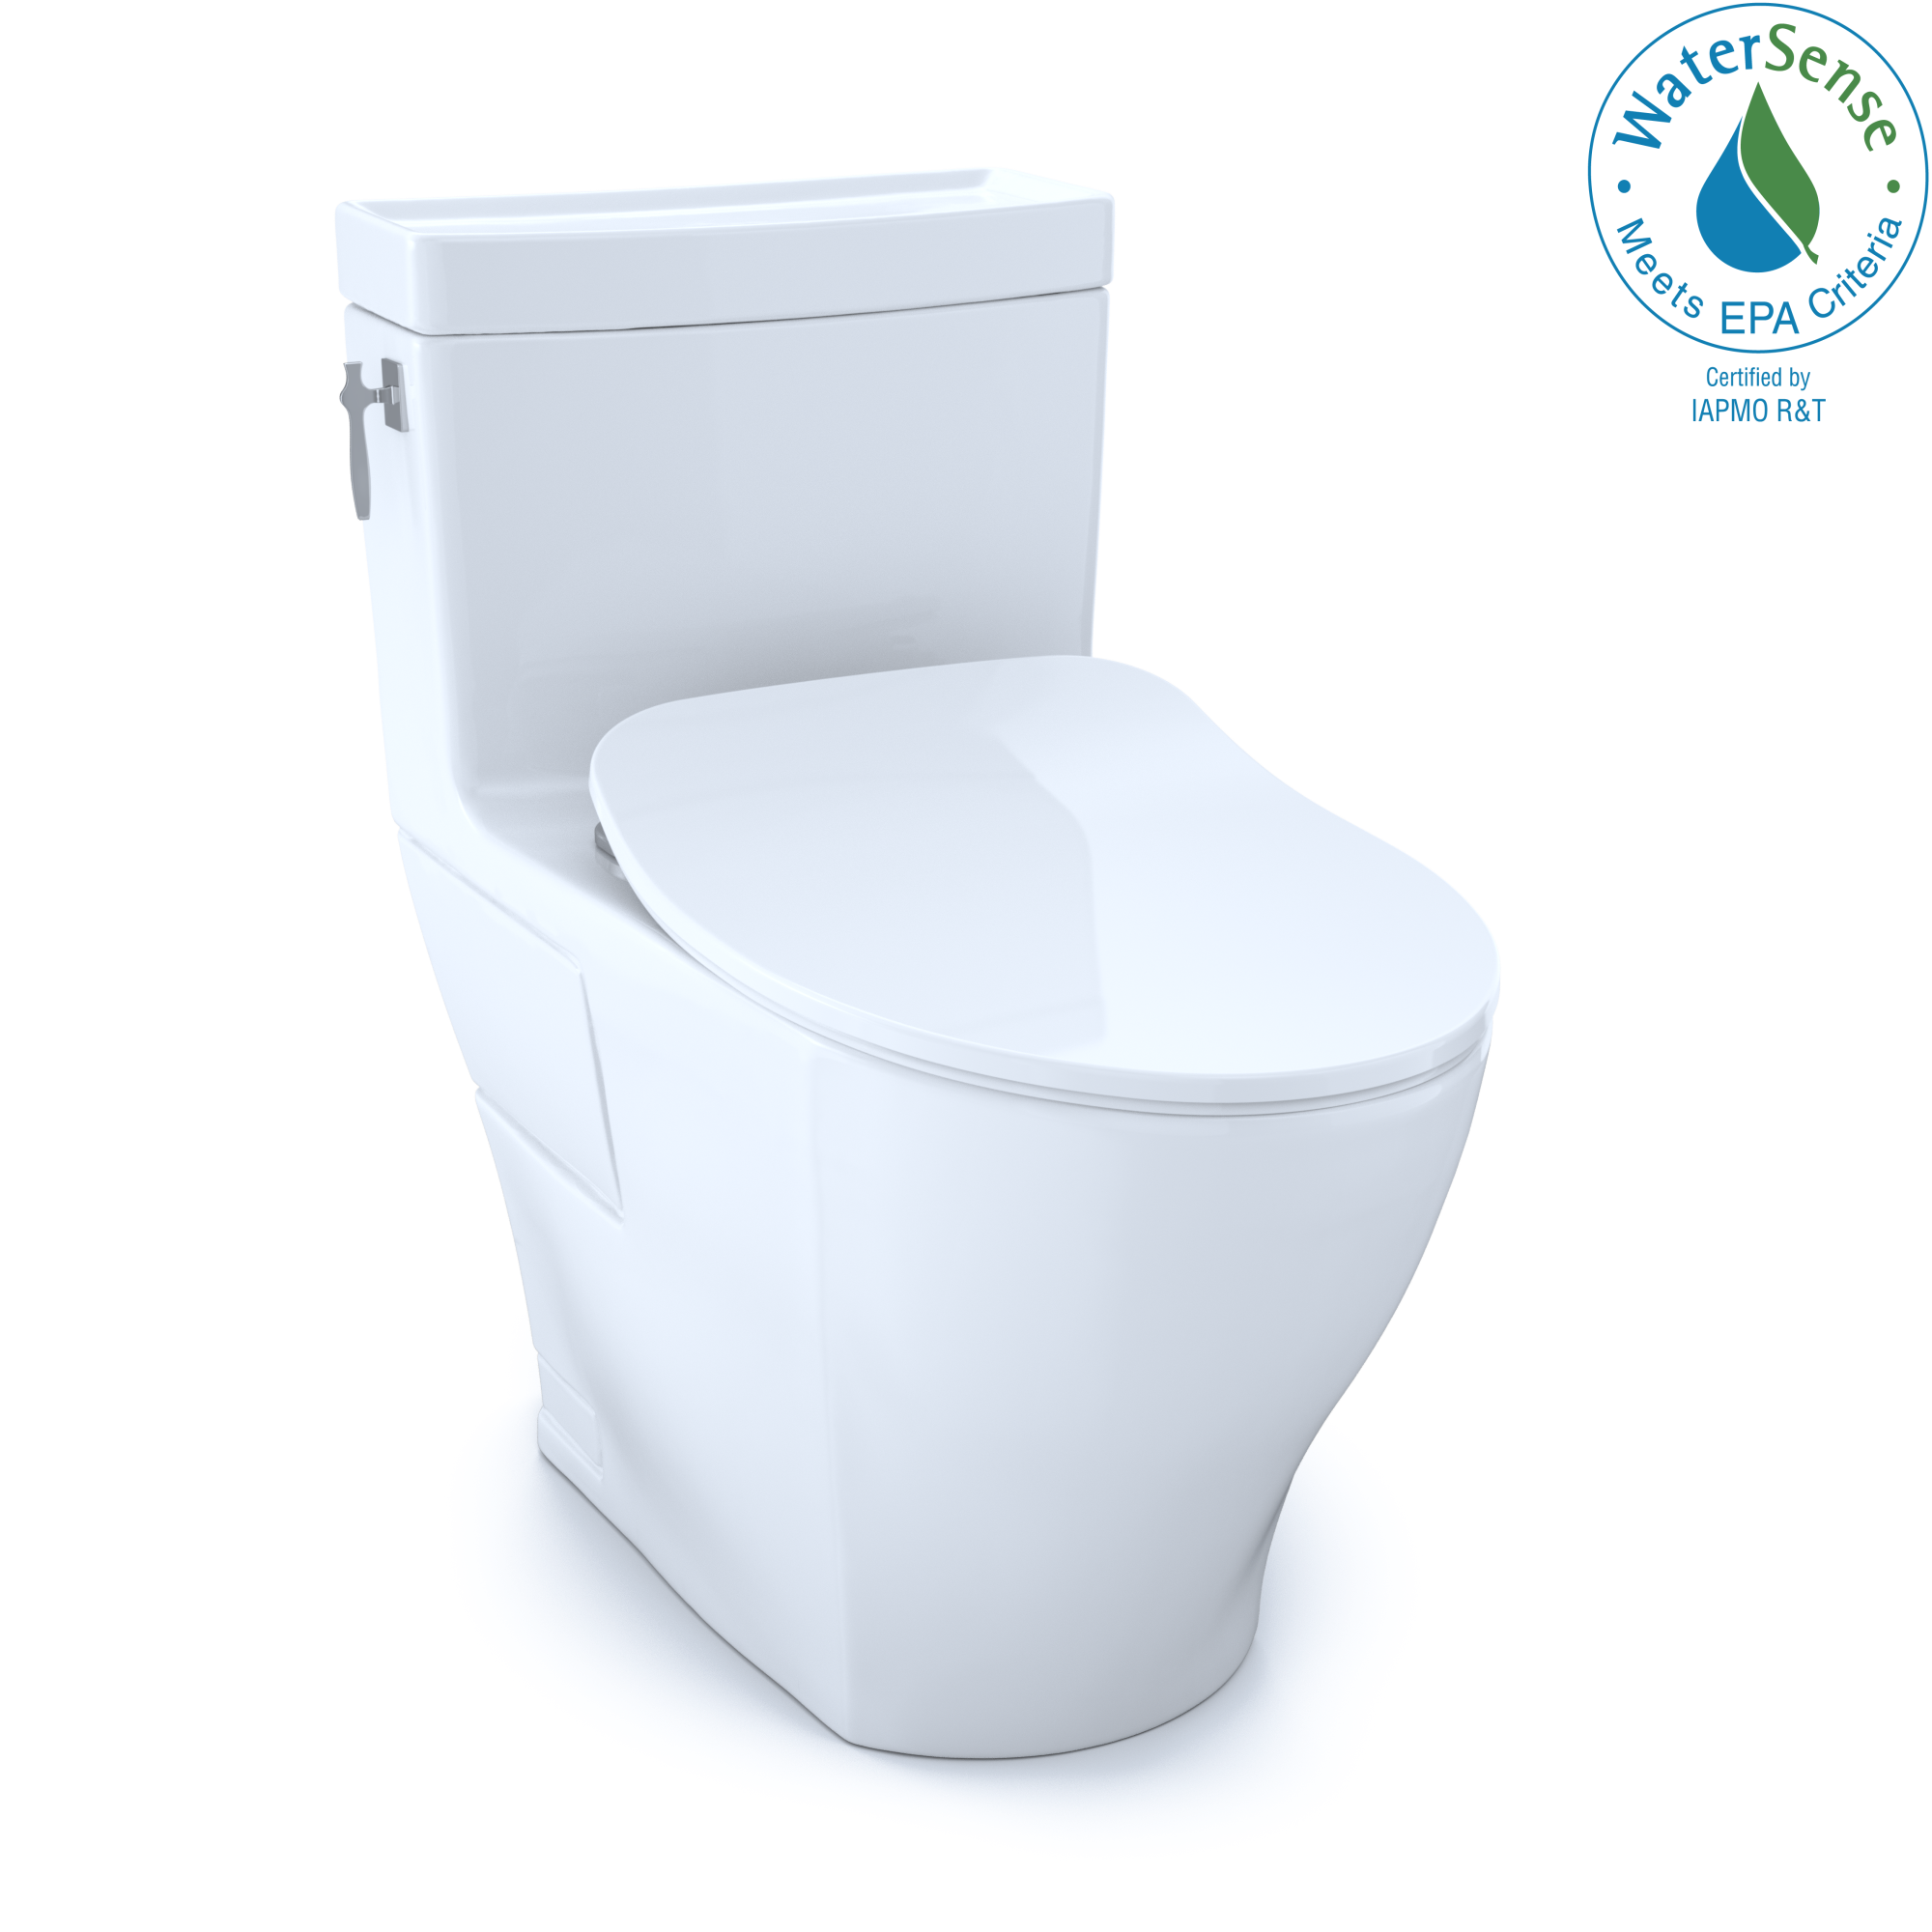 TOTO AIMES® MS626234CEFG#01 ONE-PIECE TOILET, 1.28GPF, ELONGATED BOWL - WASHLET®+ CONNECTION - Slim SoftClose Seat Included